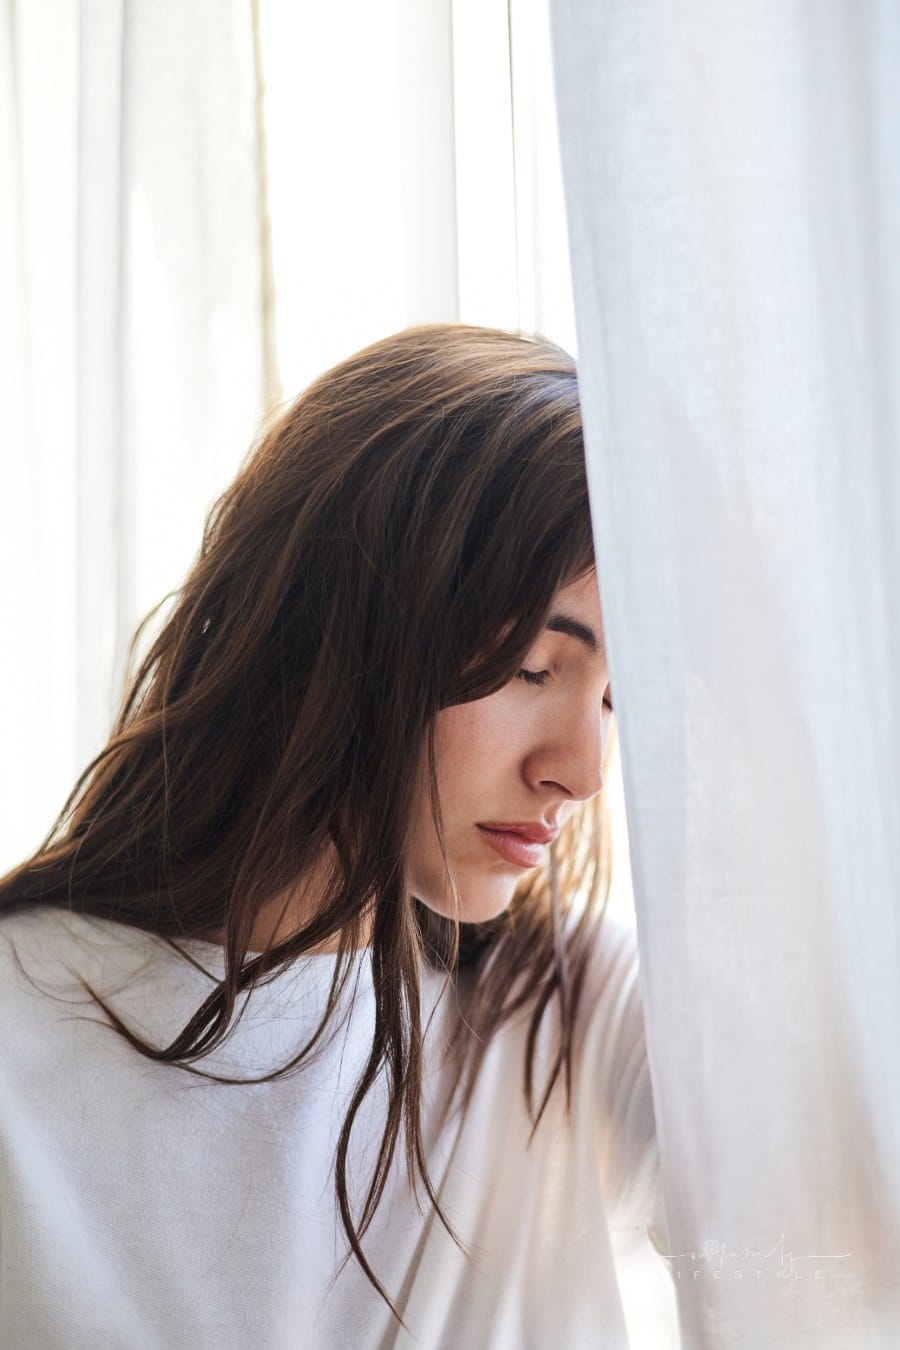 anxious woman resting head on window with her eyes closed